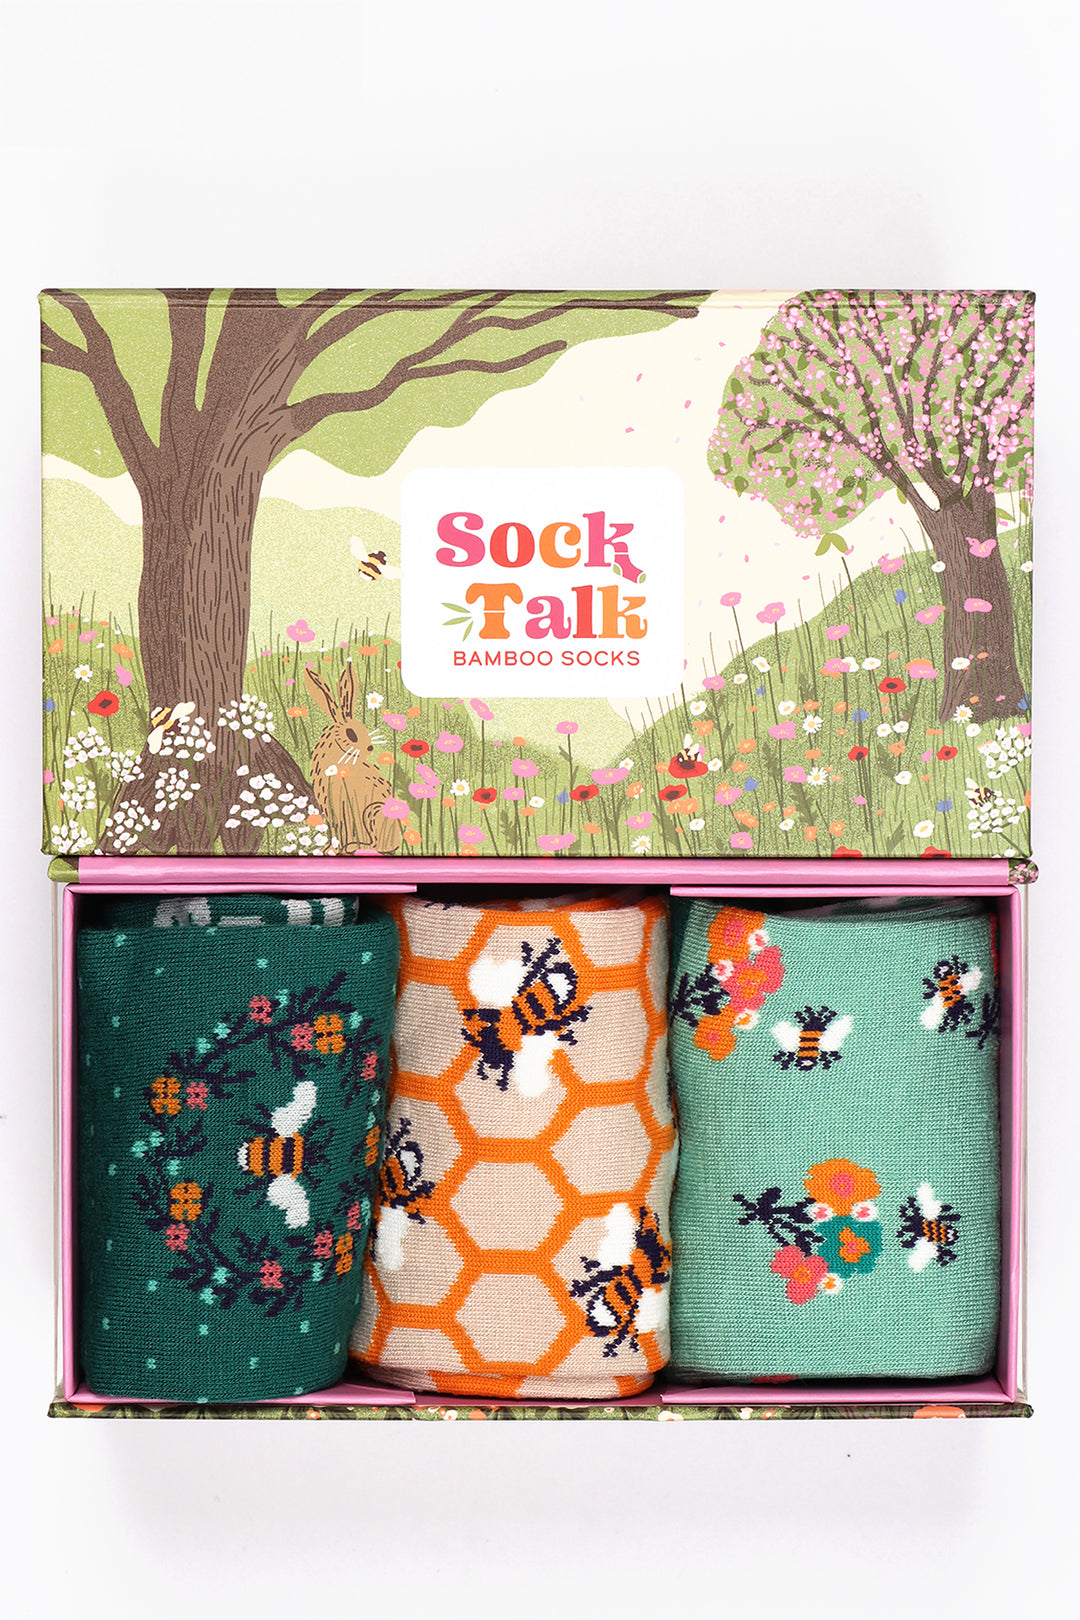 an artistic gift box designed to look like a summer meadow with wild flowers,  cherry blossom trees and rolling hills with three pairs of ladies bamboo socks featuring bees and flowers